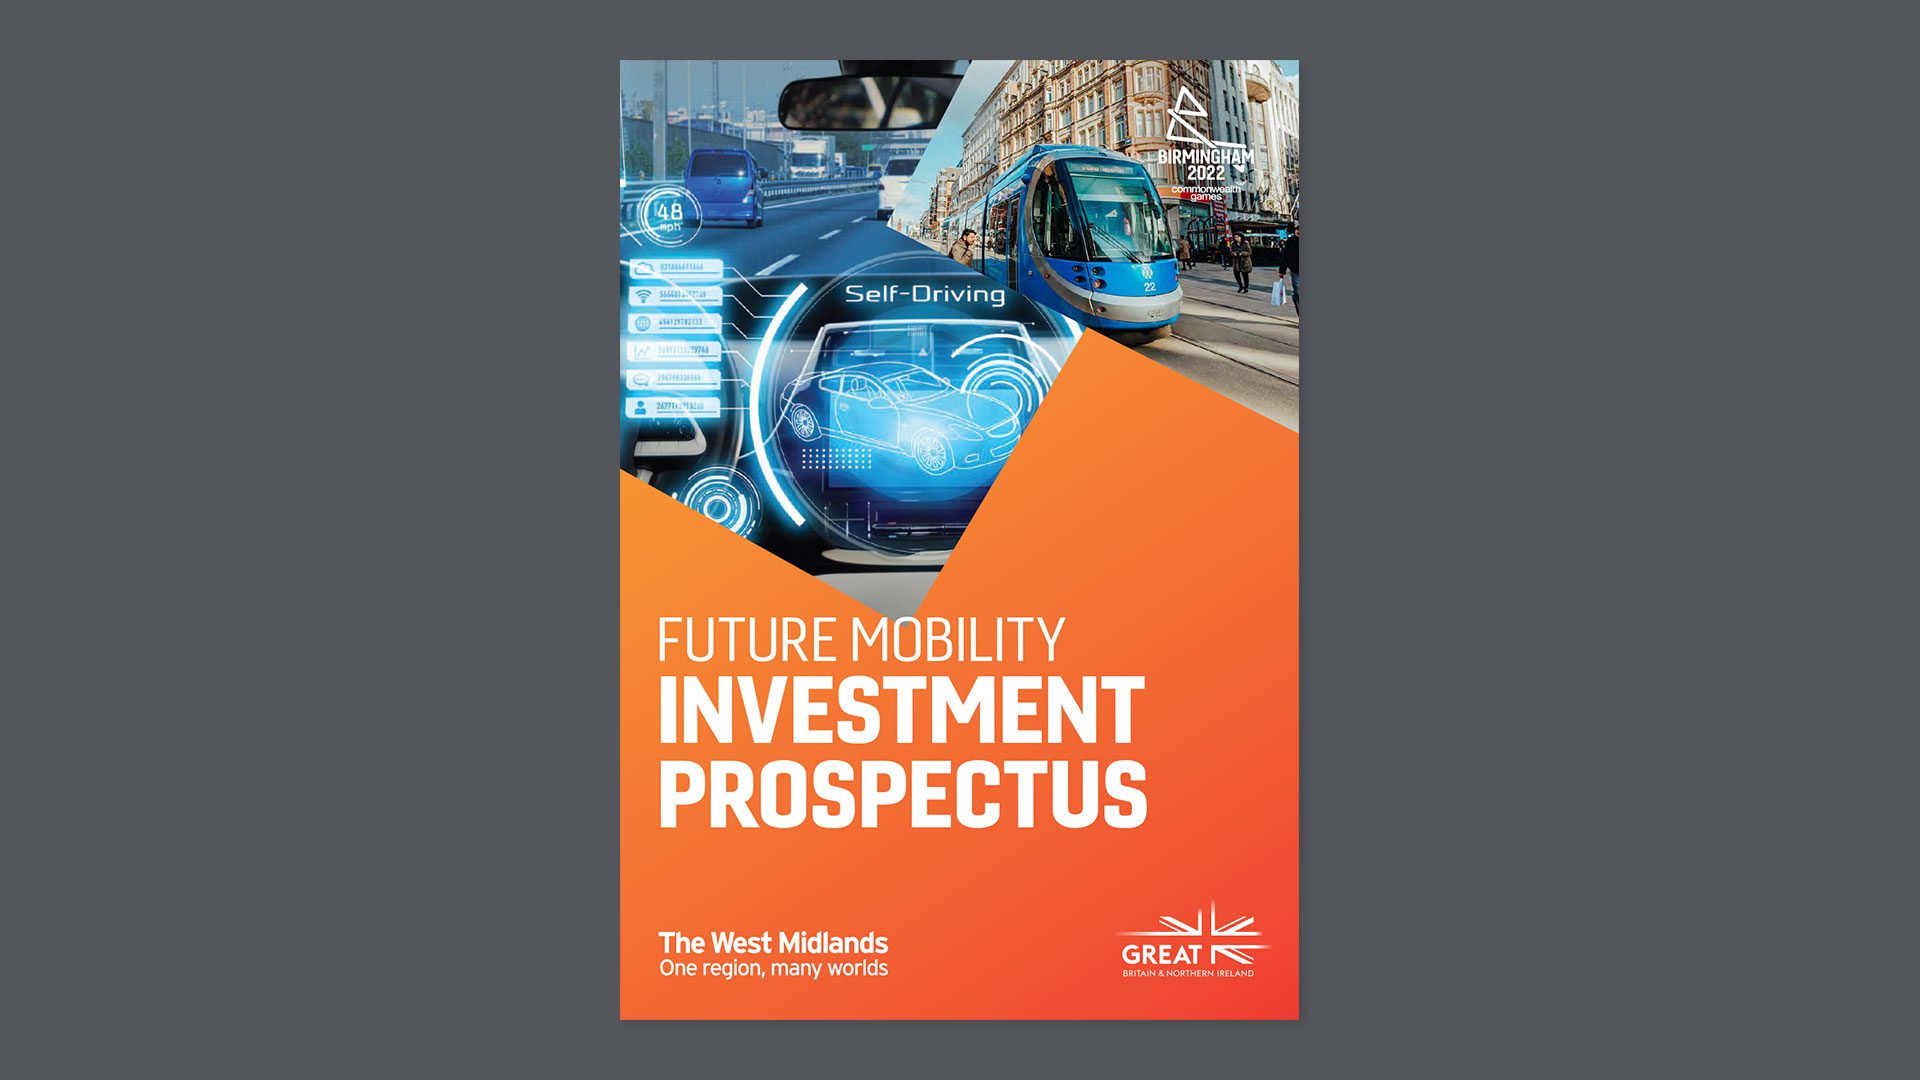 'Future Mobility Investment Prospectus' brochure cover.